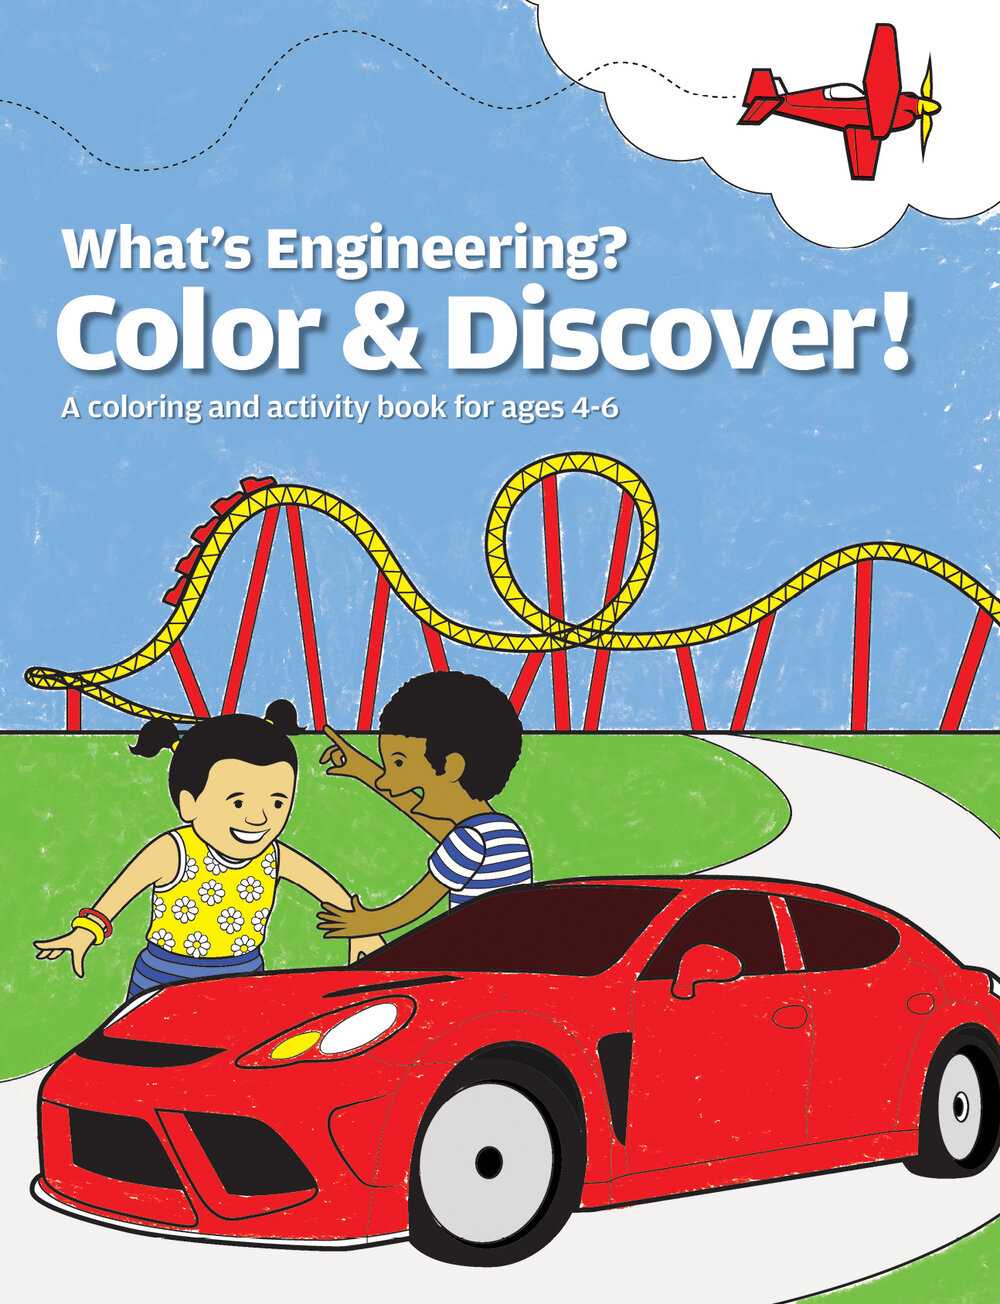 Engineering Coloring Book for Adults